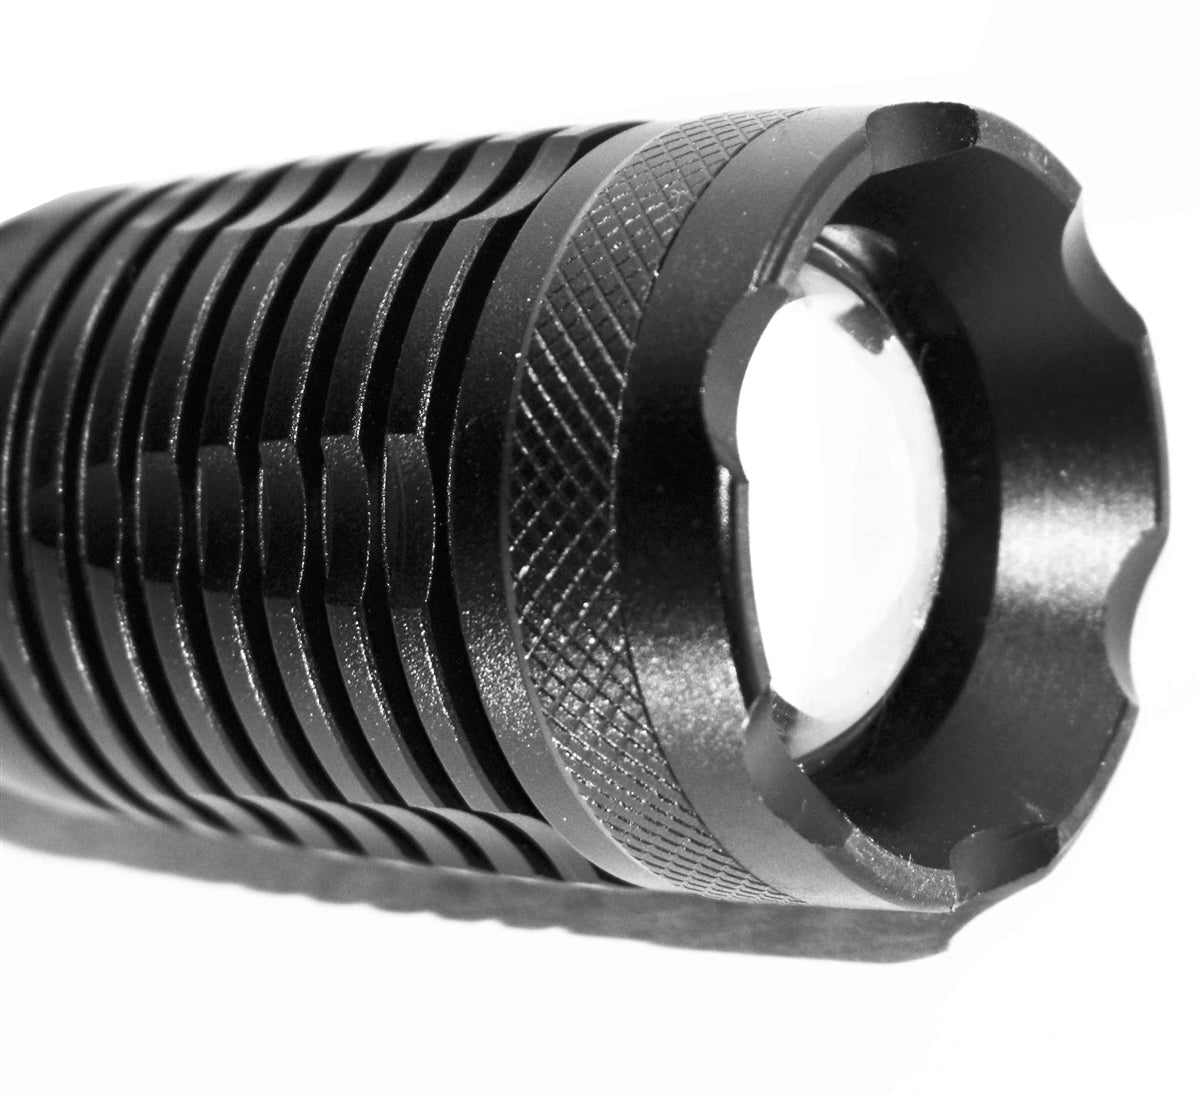 Tactical 1500 Lumen Flashlight With Mount Compatible With Stevens 320 20 gauge Pump.